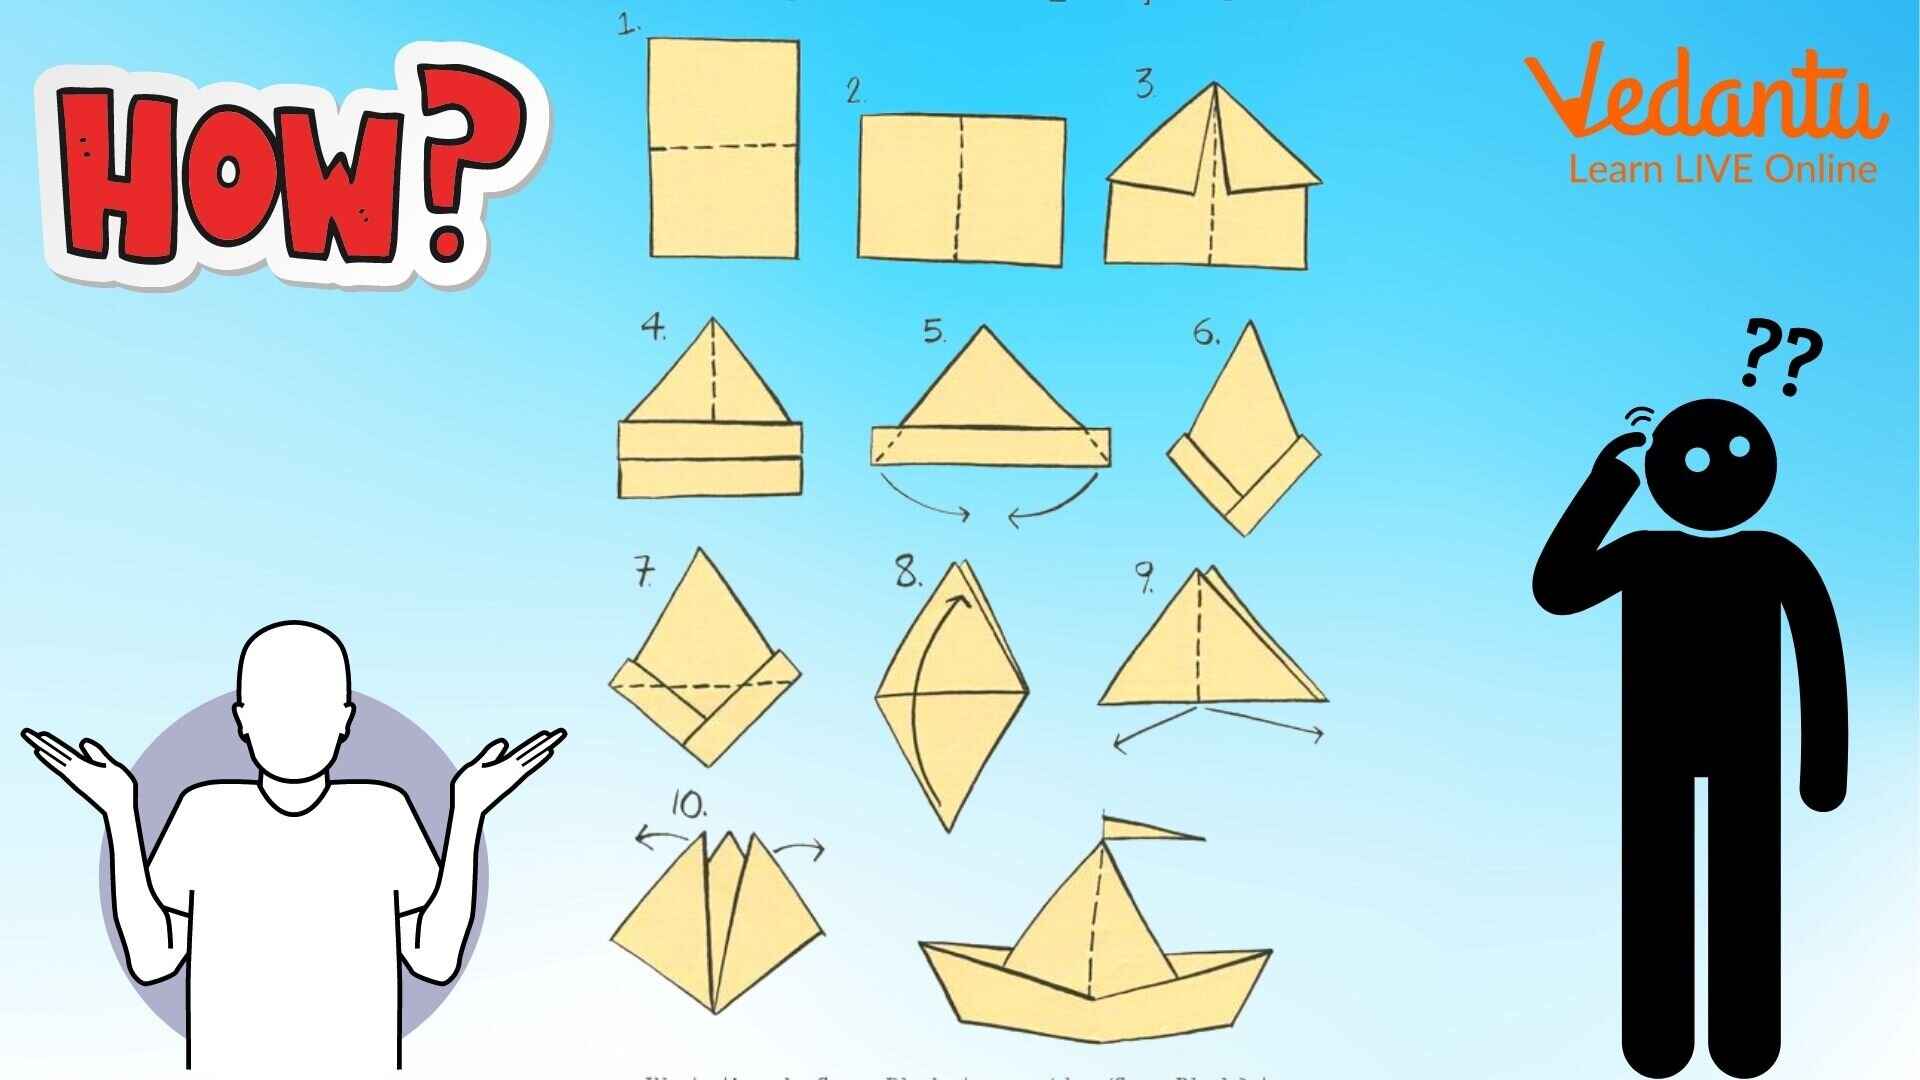 instructions-on-how-to-make-a-paper-boat-step-by-step-origami-diy-paper